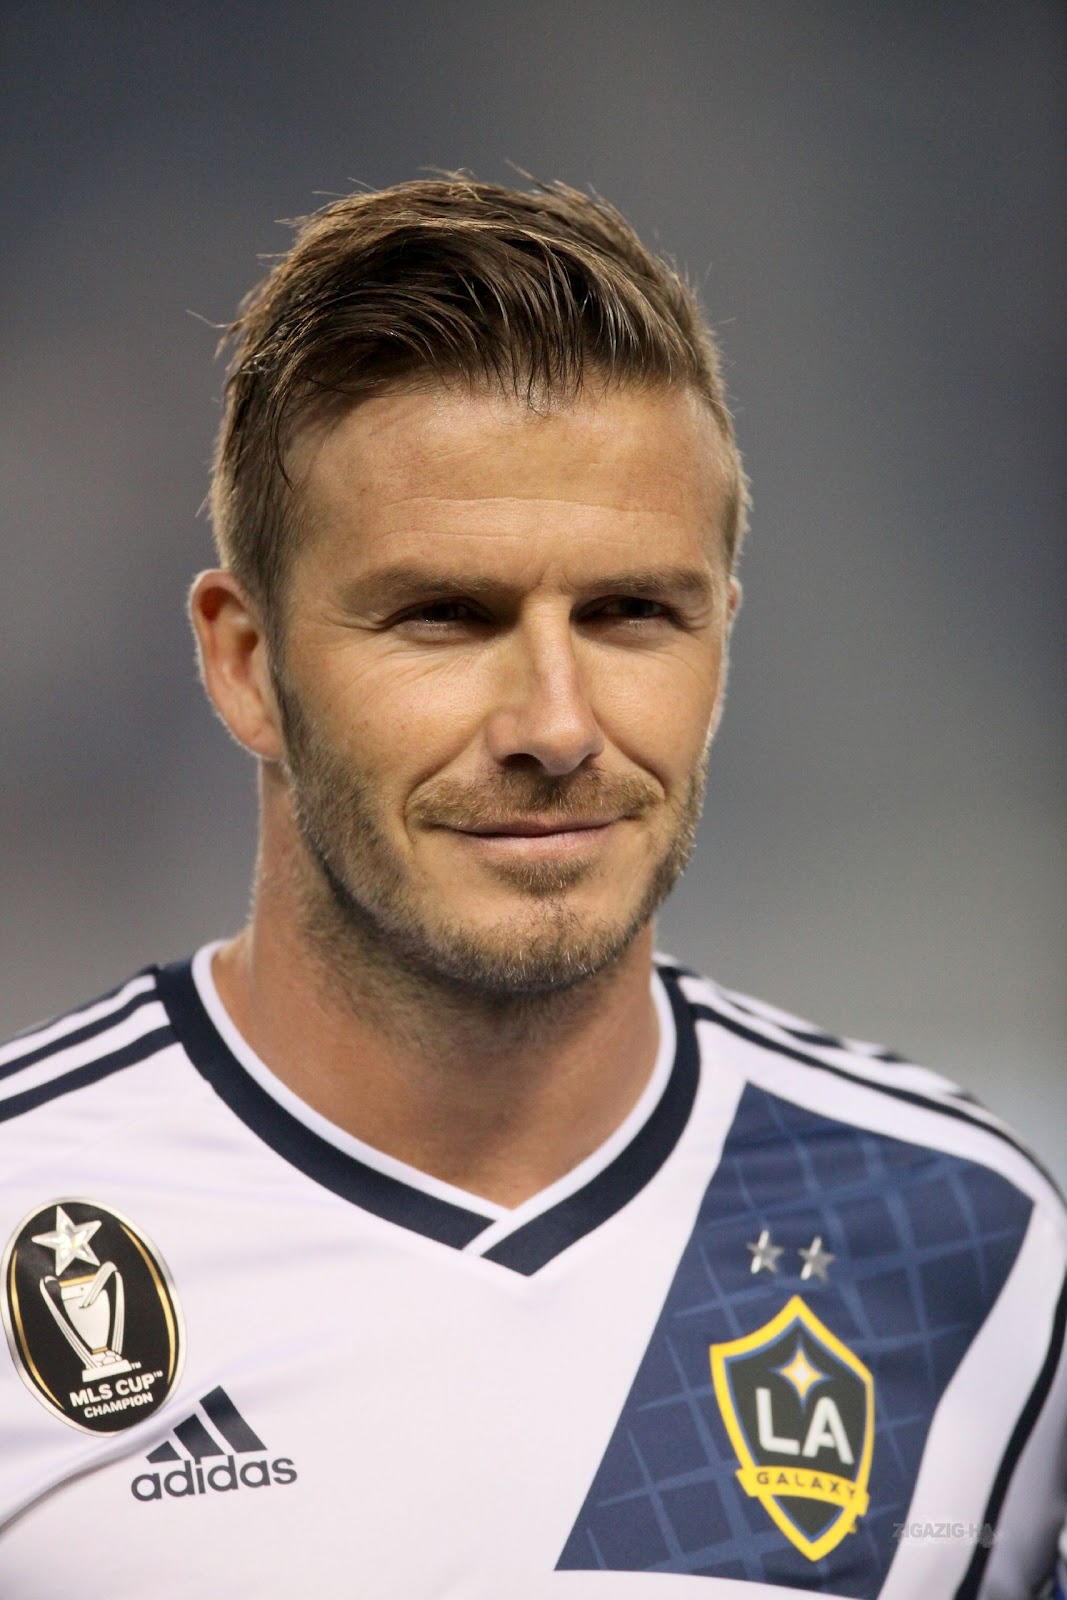 Sports Stars: David Beckham Profile, Pictures And Wallpapers